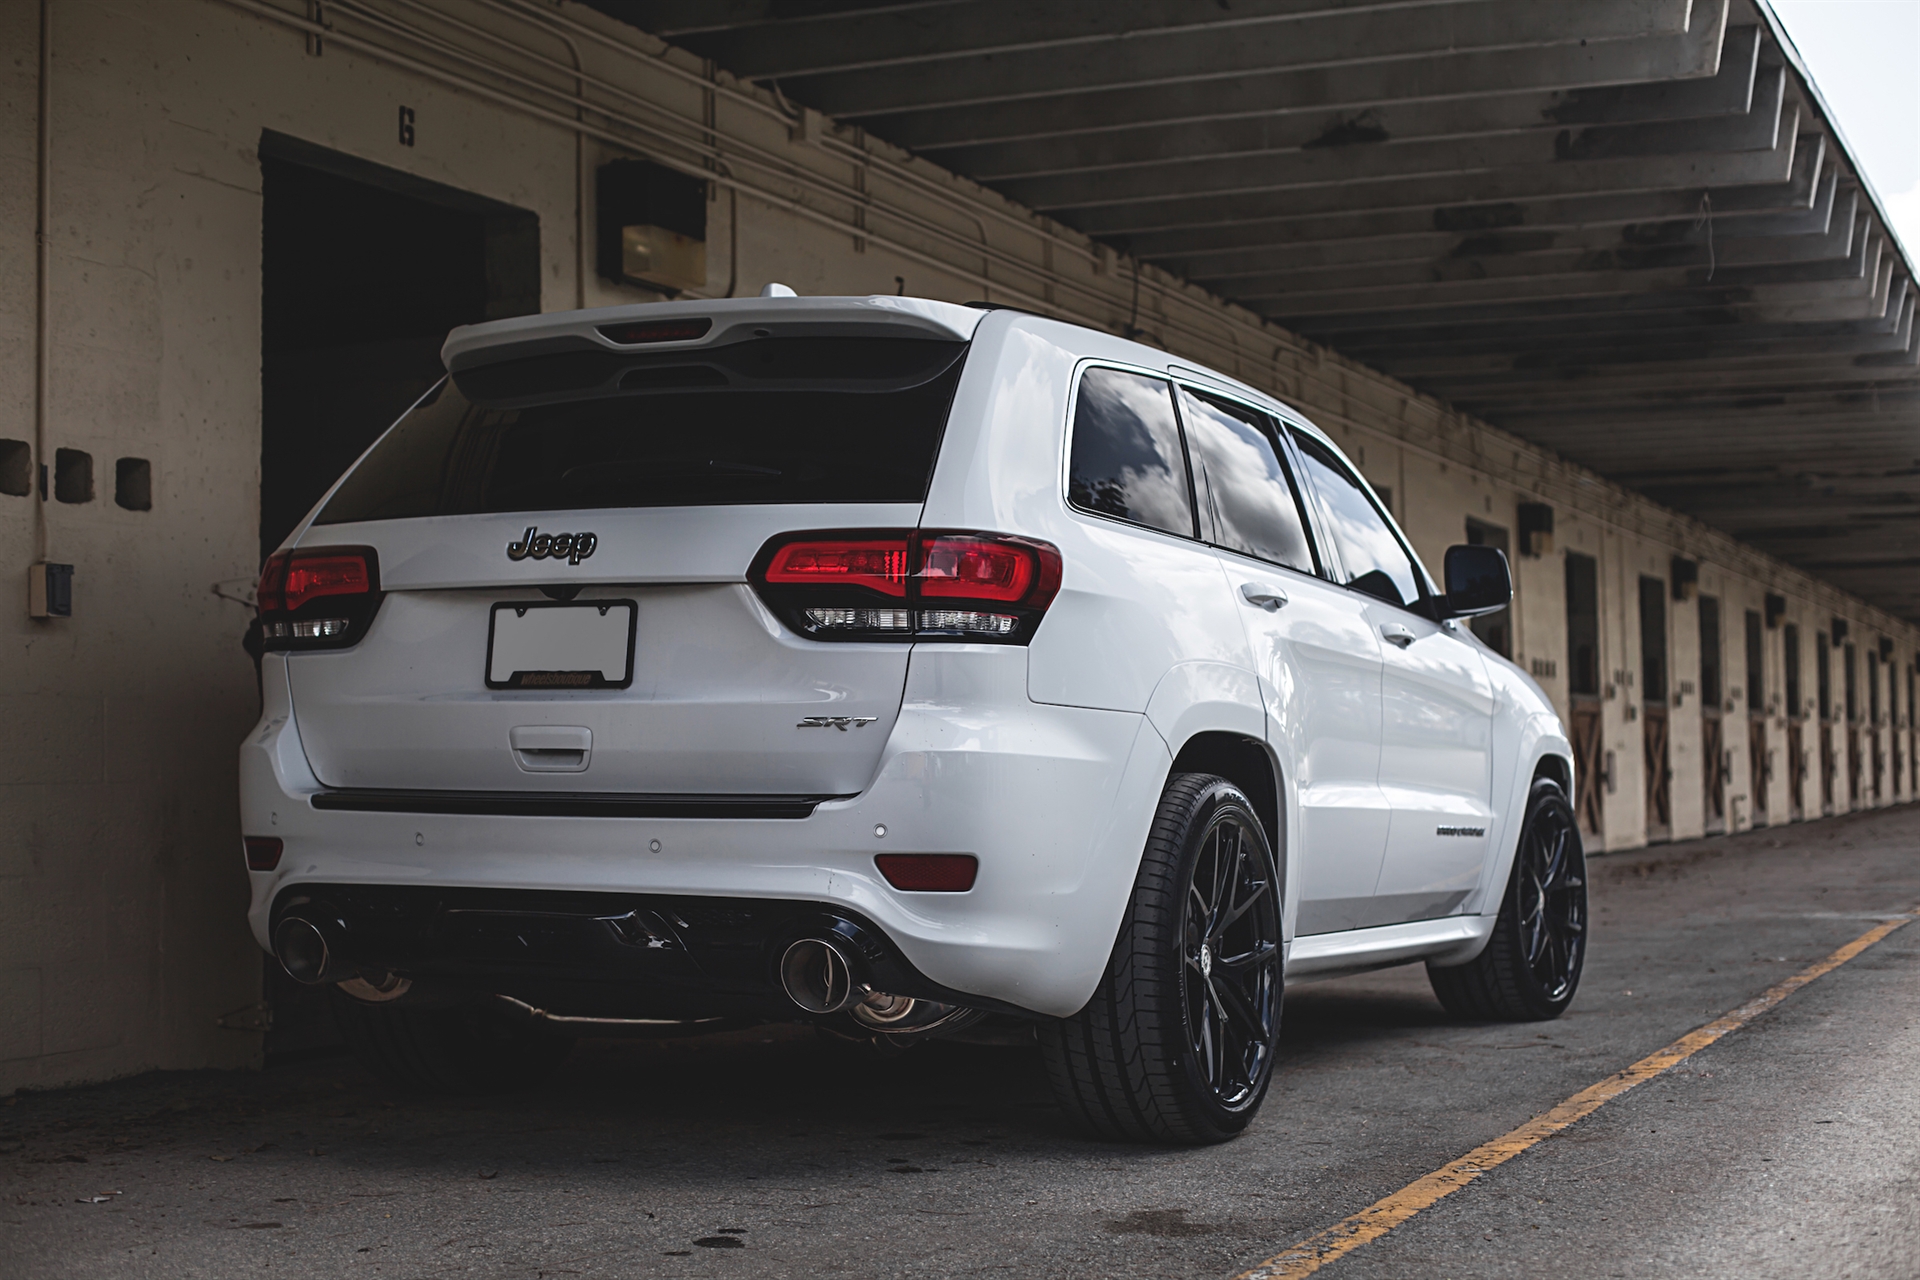 Jeep Grand Cherokee SRT8 on HRE P101 Gallery | Wheels Boutique 2003 Jeep Grand Cherokee 4.0 Towing Capacity